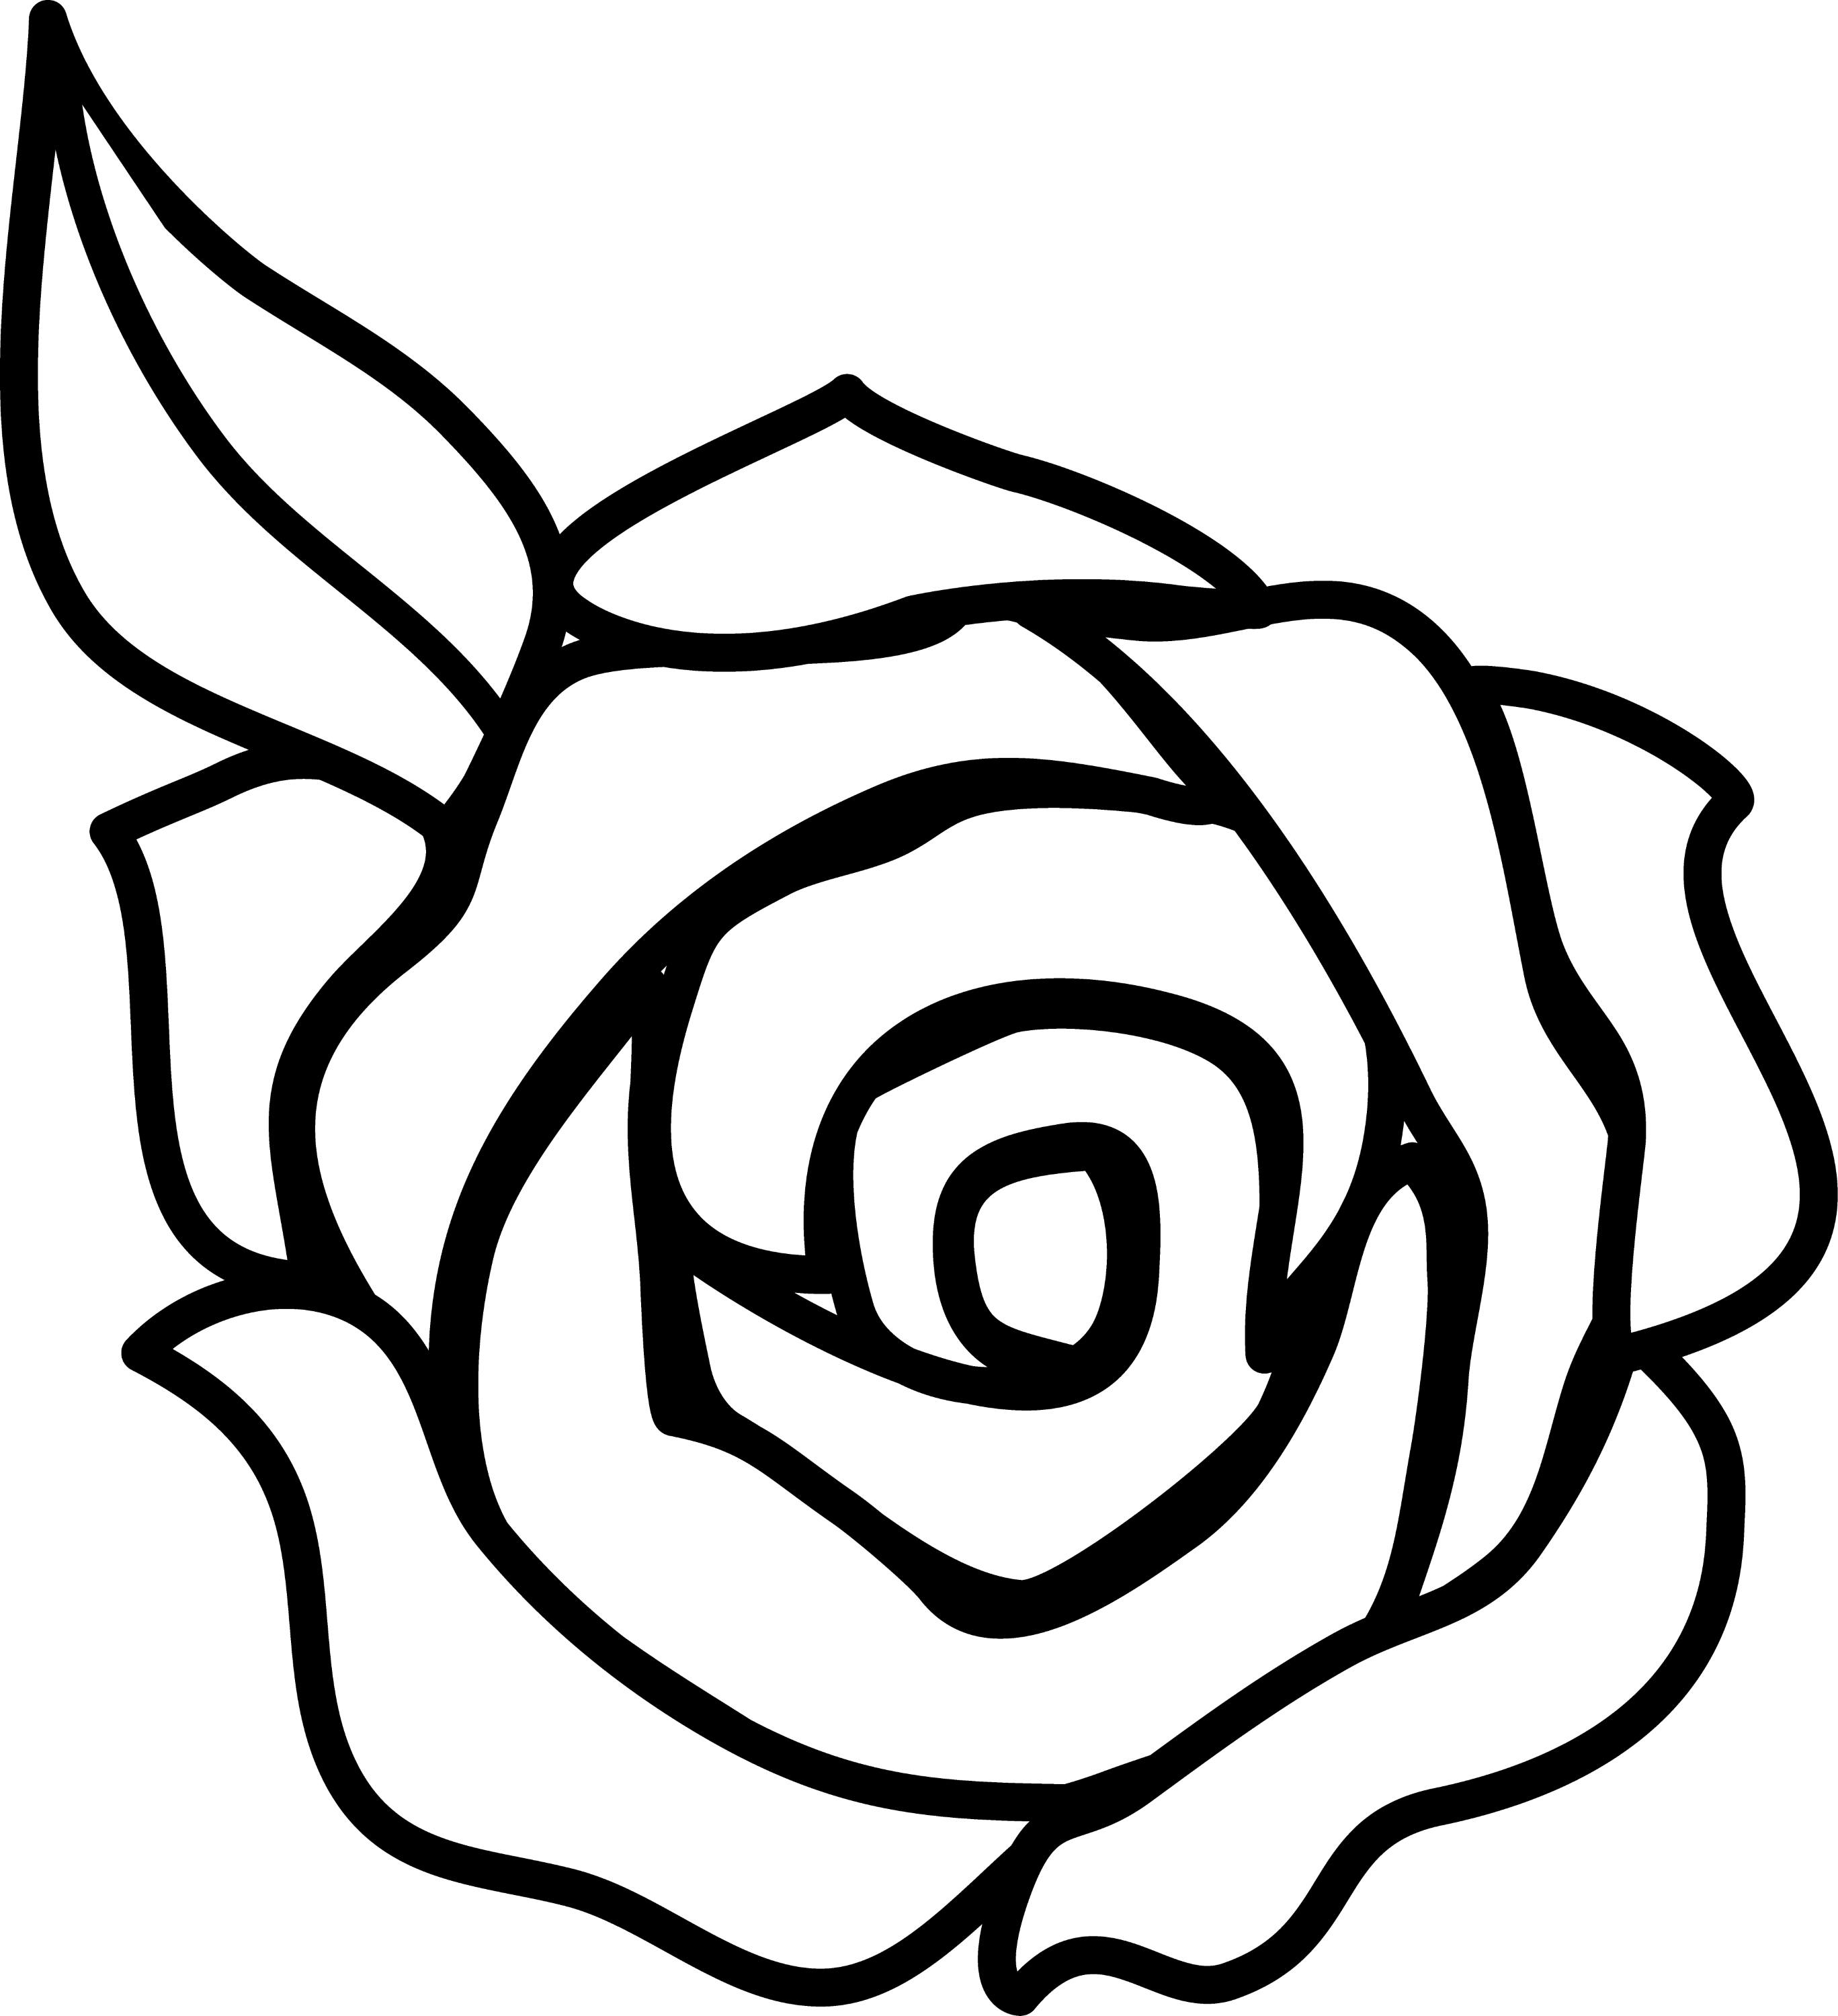 free black and white clip art roses - photo #18